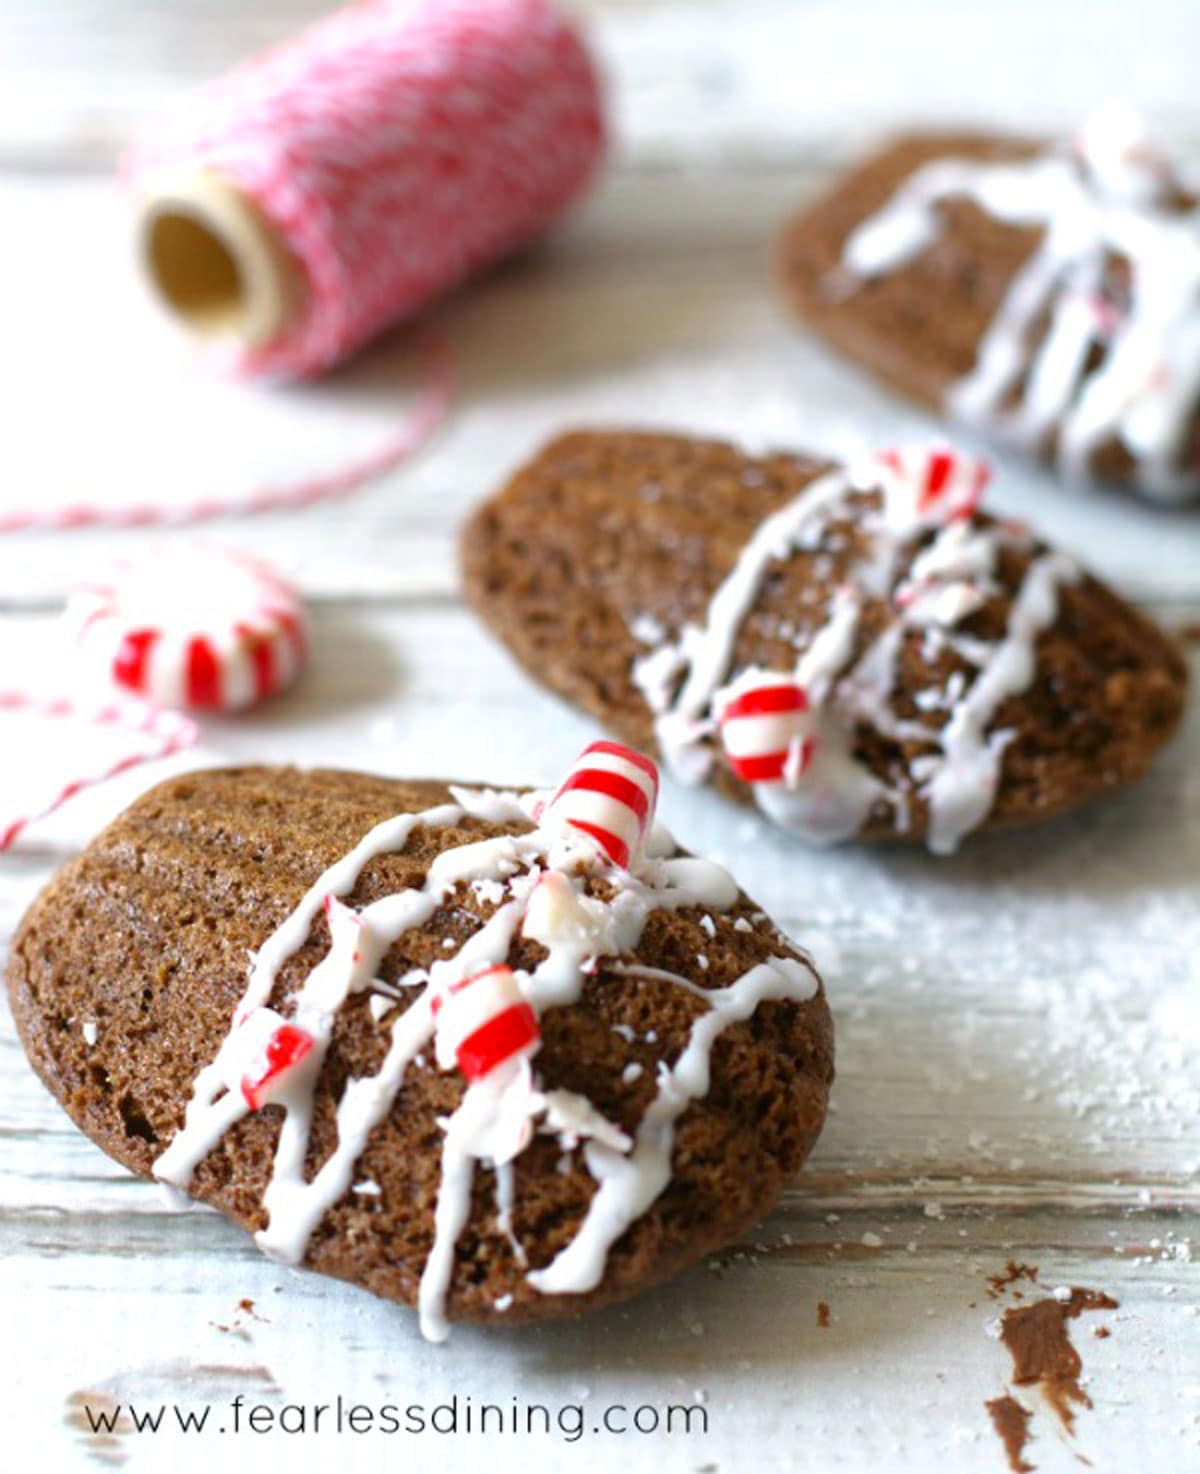 A row of chocolate madeleines with crushed candy cane on top.